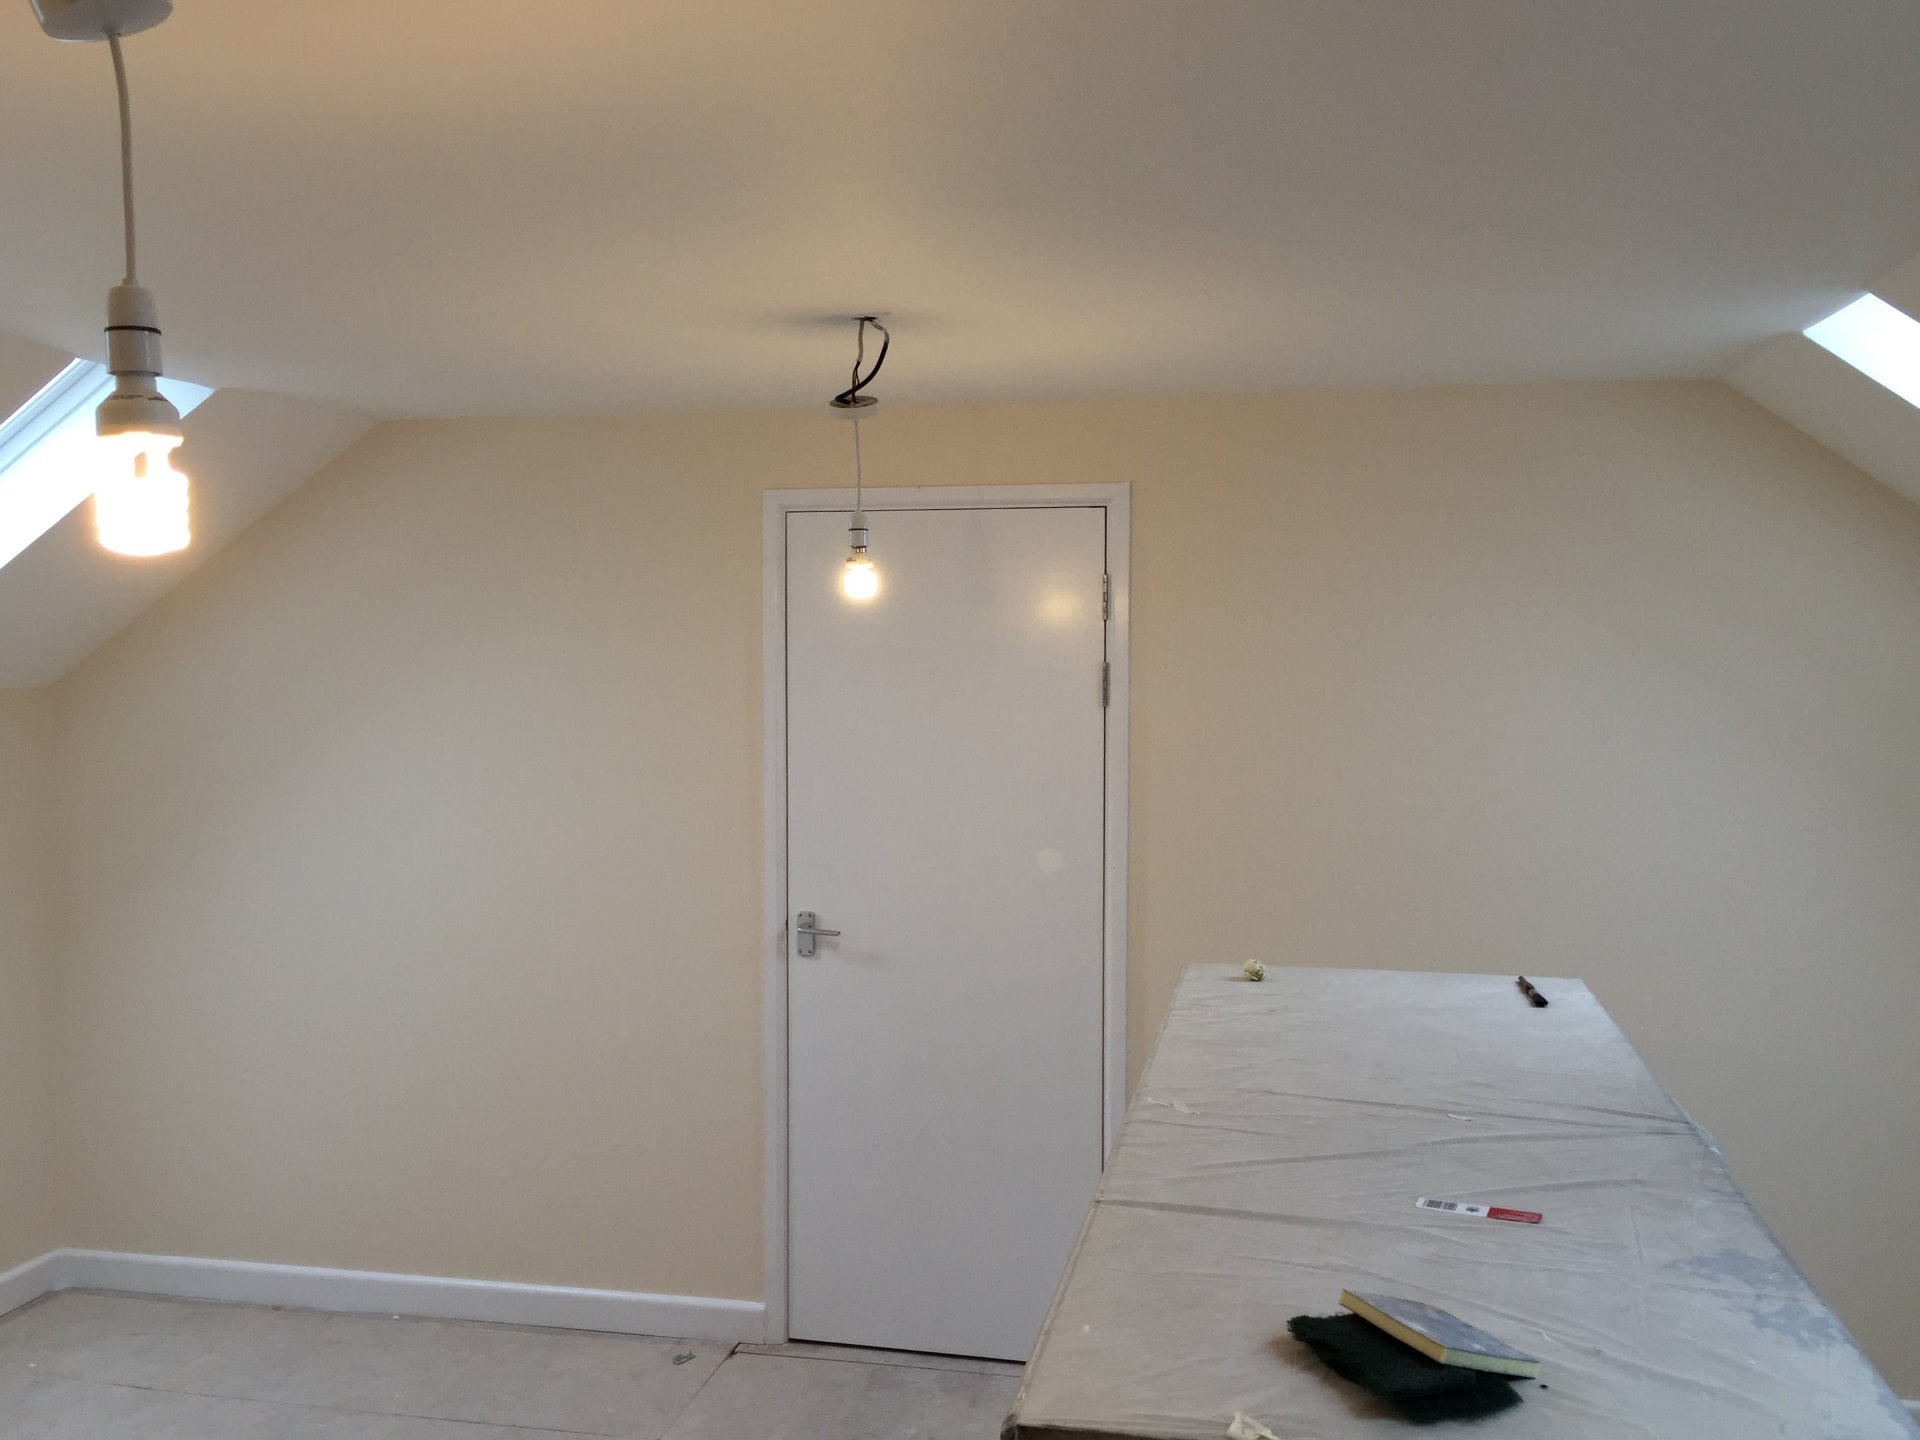 Skirtings and architraves were installed. Ready for the decorations, all wood work received Knotting, primer, undercoat and a full coat of gloss. Walls had a primer and two coats of emulsion in North Devon